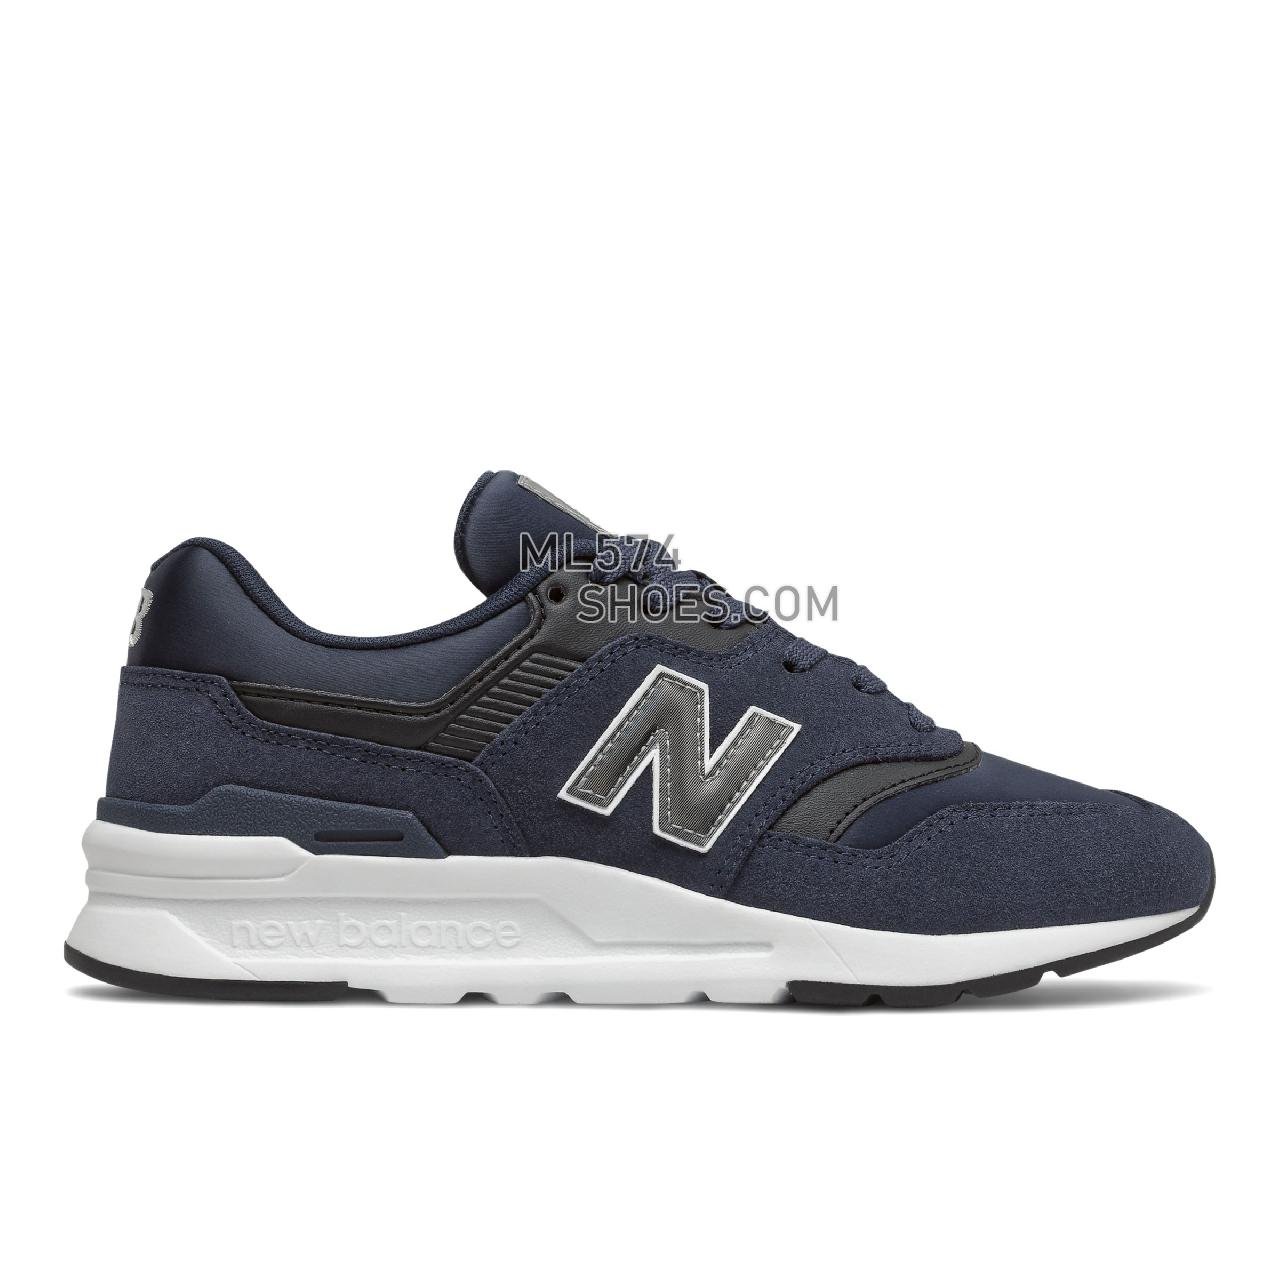 New Balance 997H - Women's Classic Sneakers - Natural Indigo with Black - CW997HGG